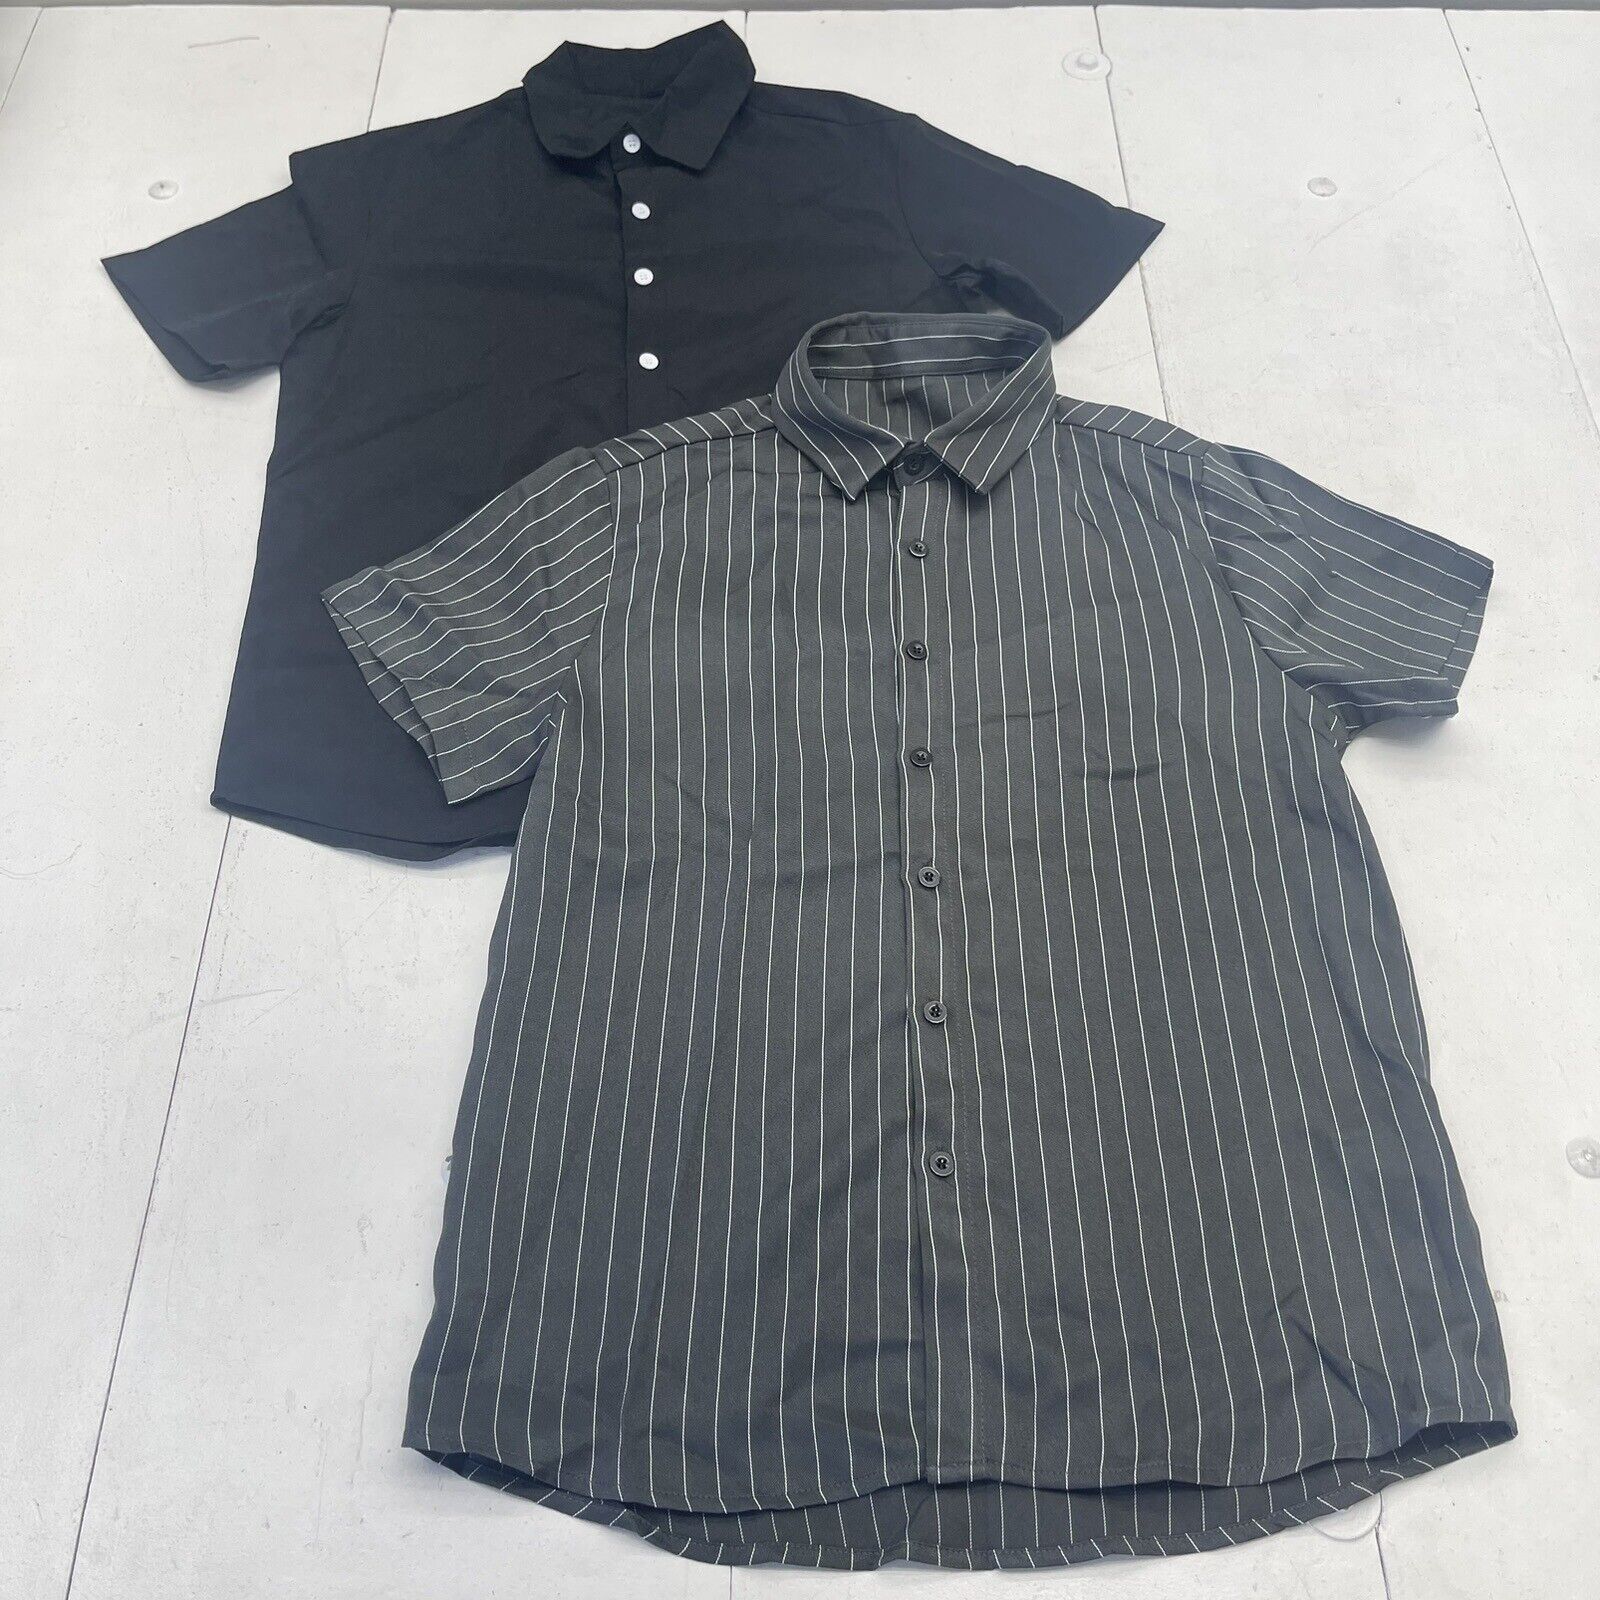 Shein 2 Pack Grey Stripe & Black Button Up Shirts Mens Small New